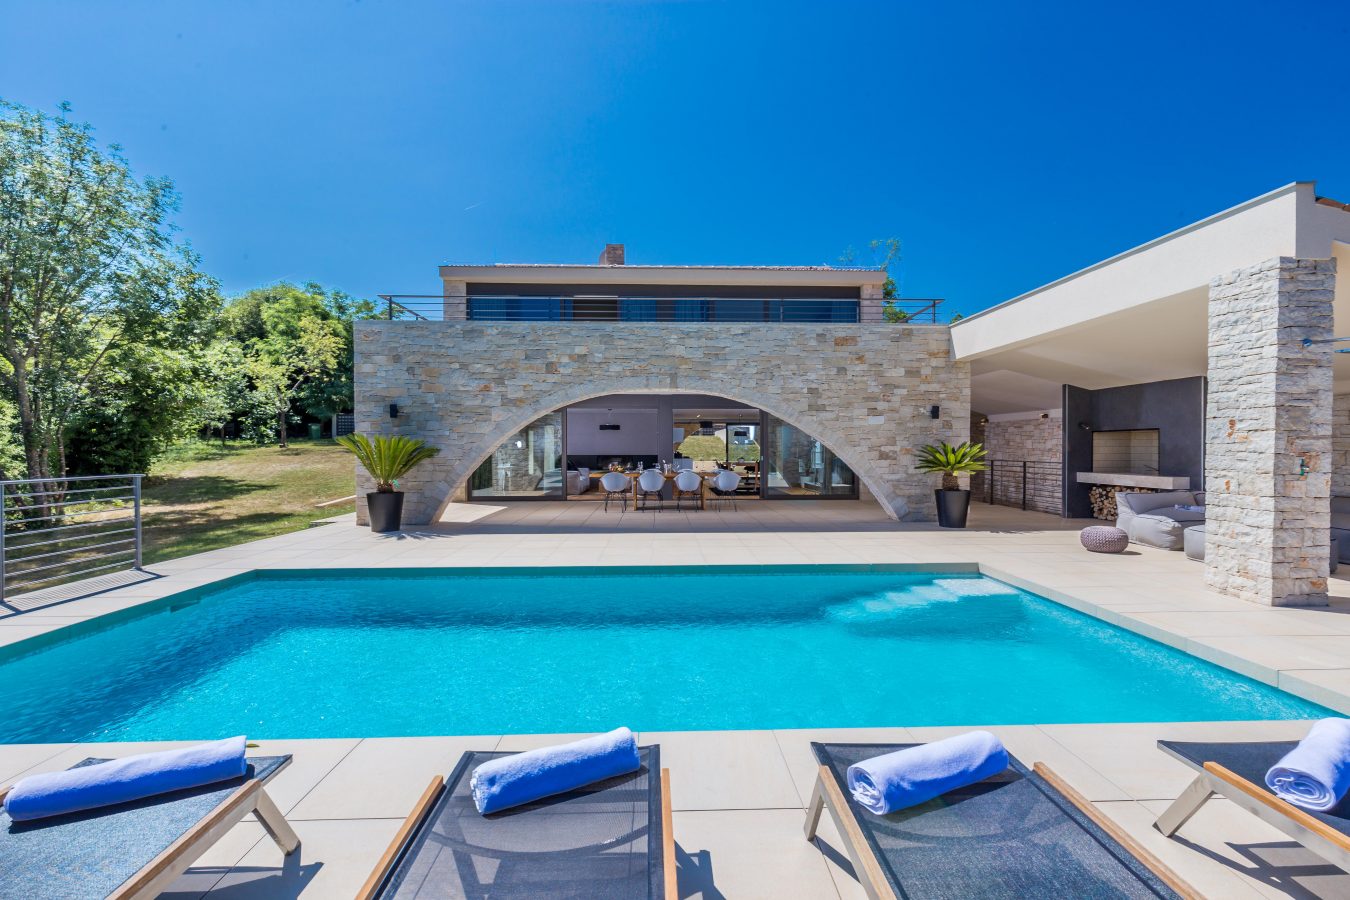 Stone Villa Dvo - relaxation by the pool surrounded